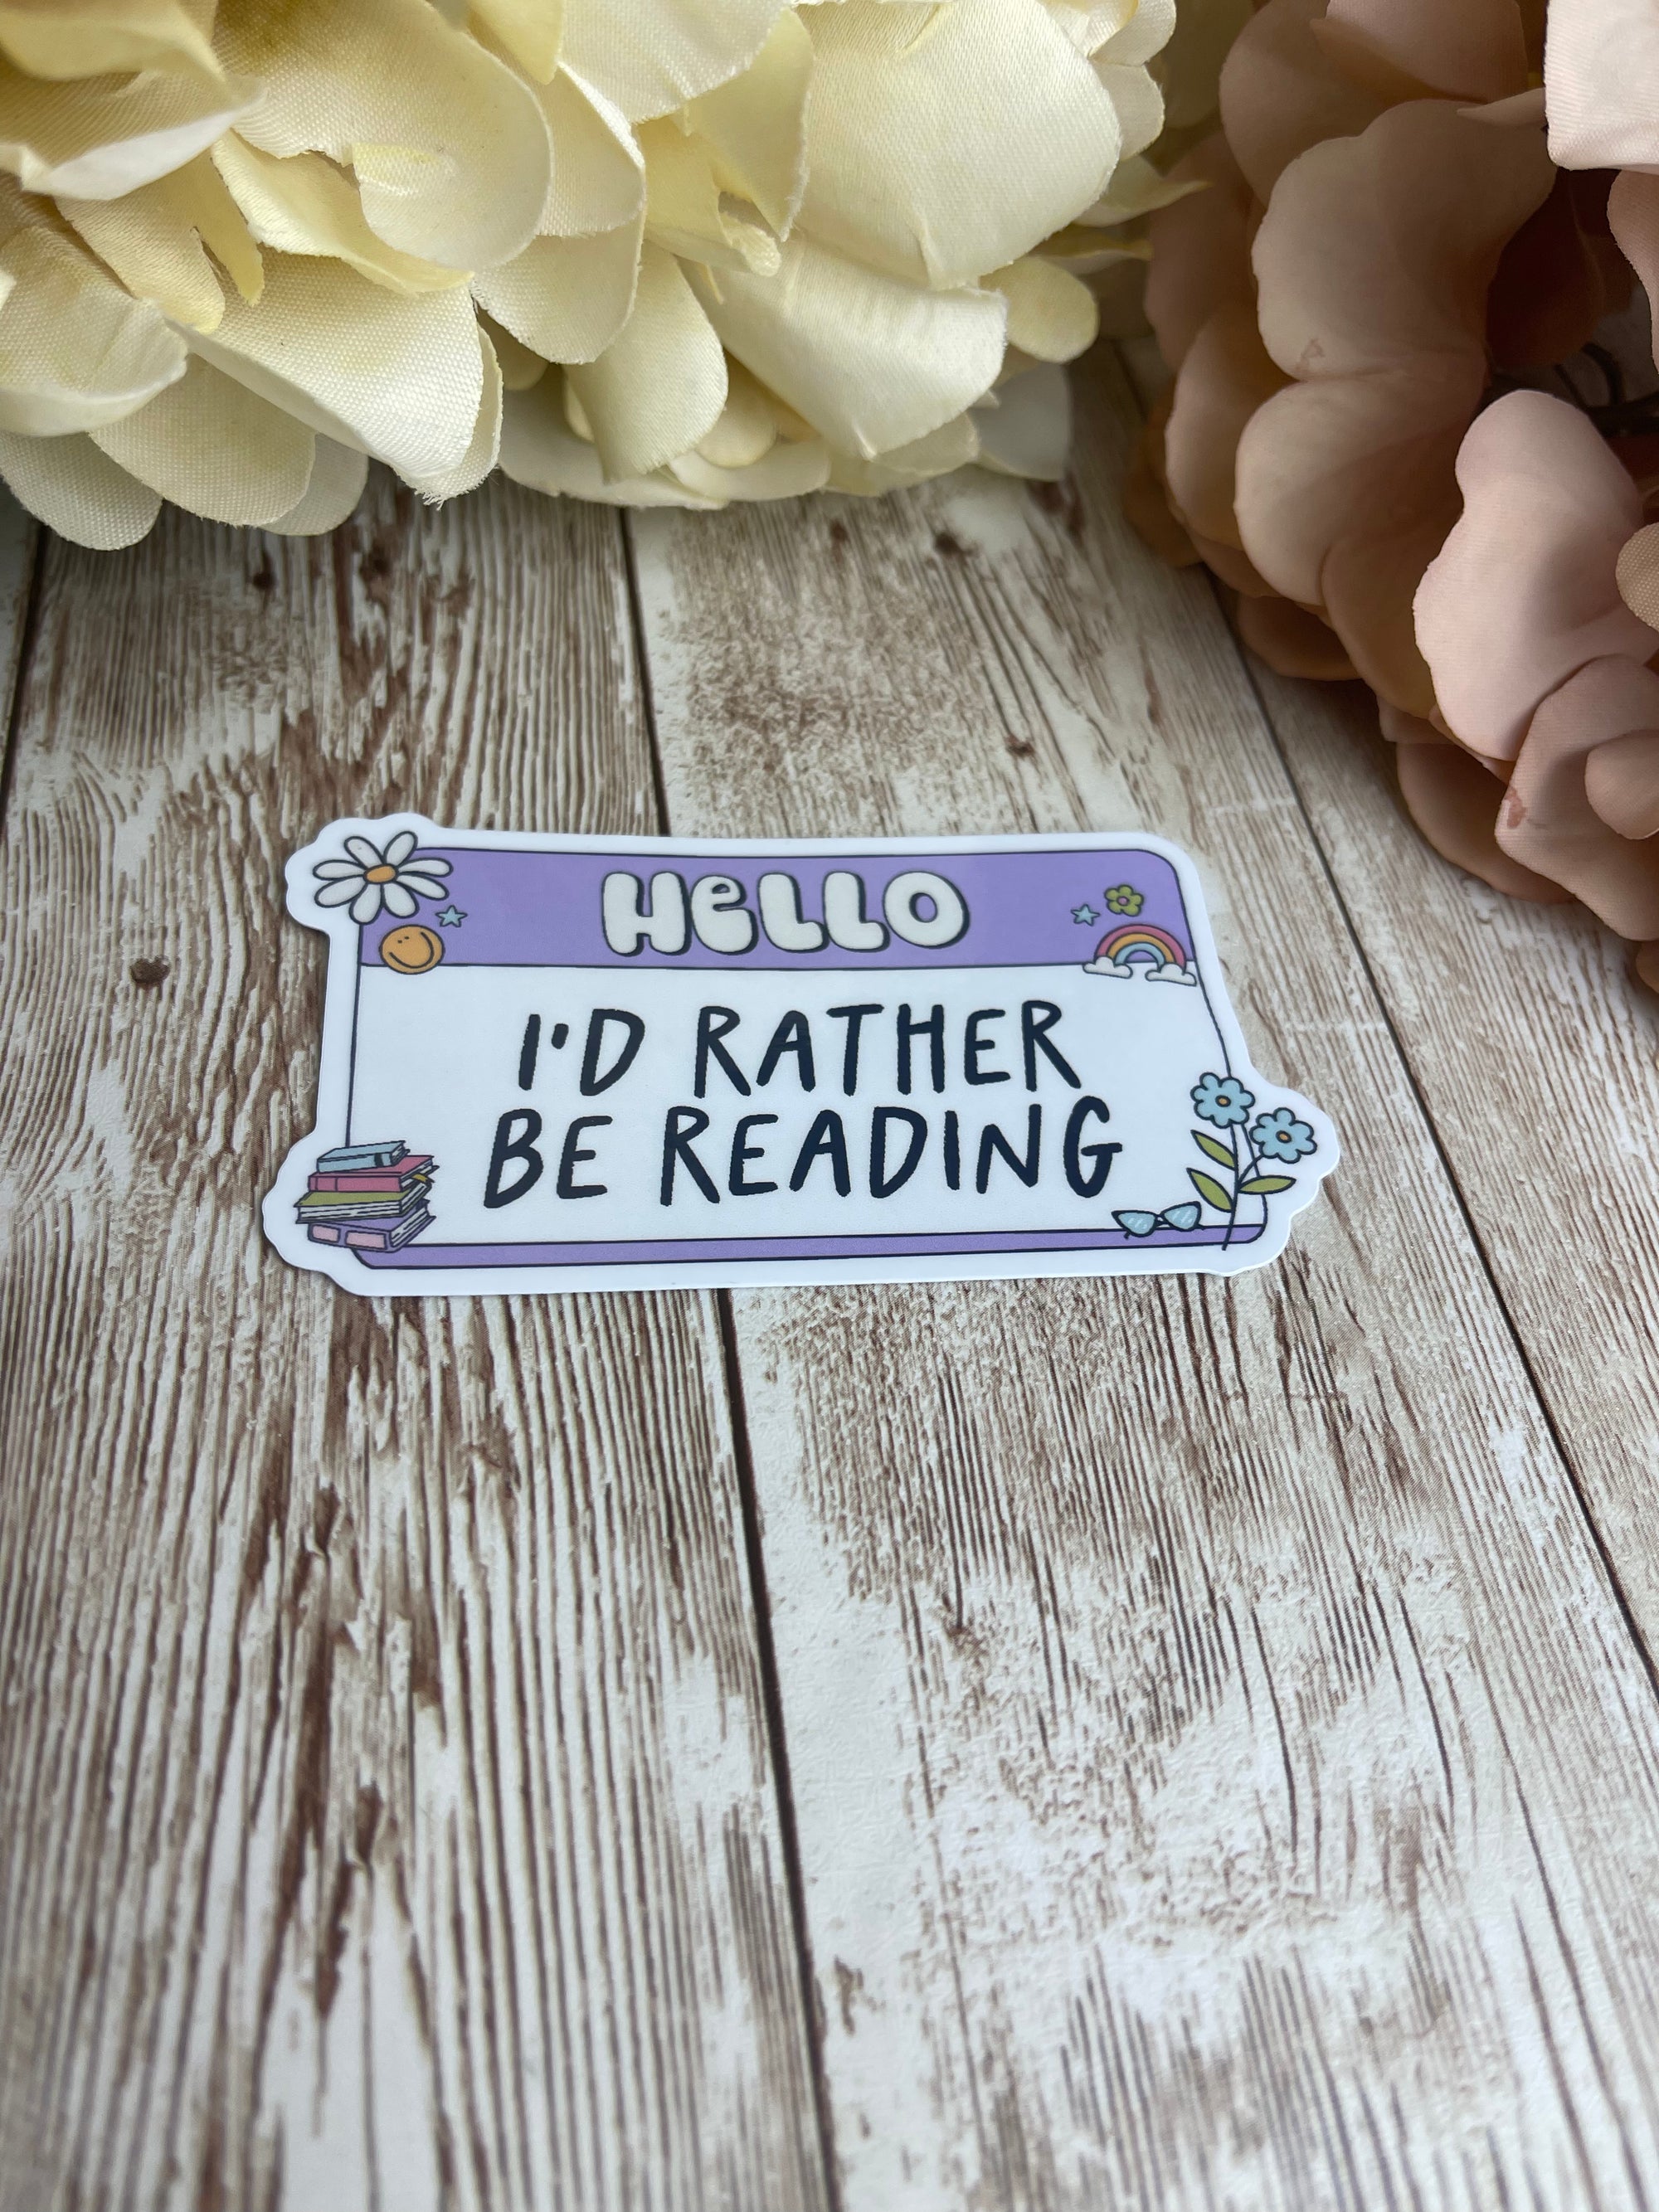 Hello, I’d rather be reading - Sticker